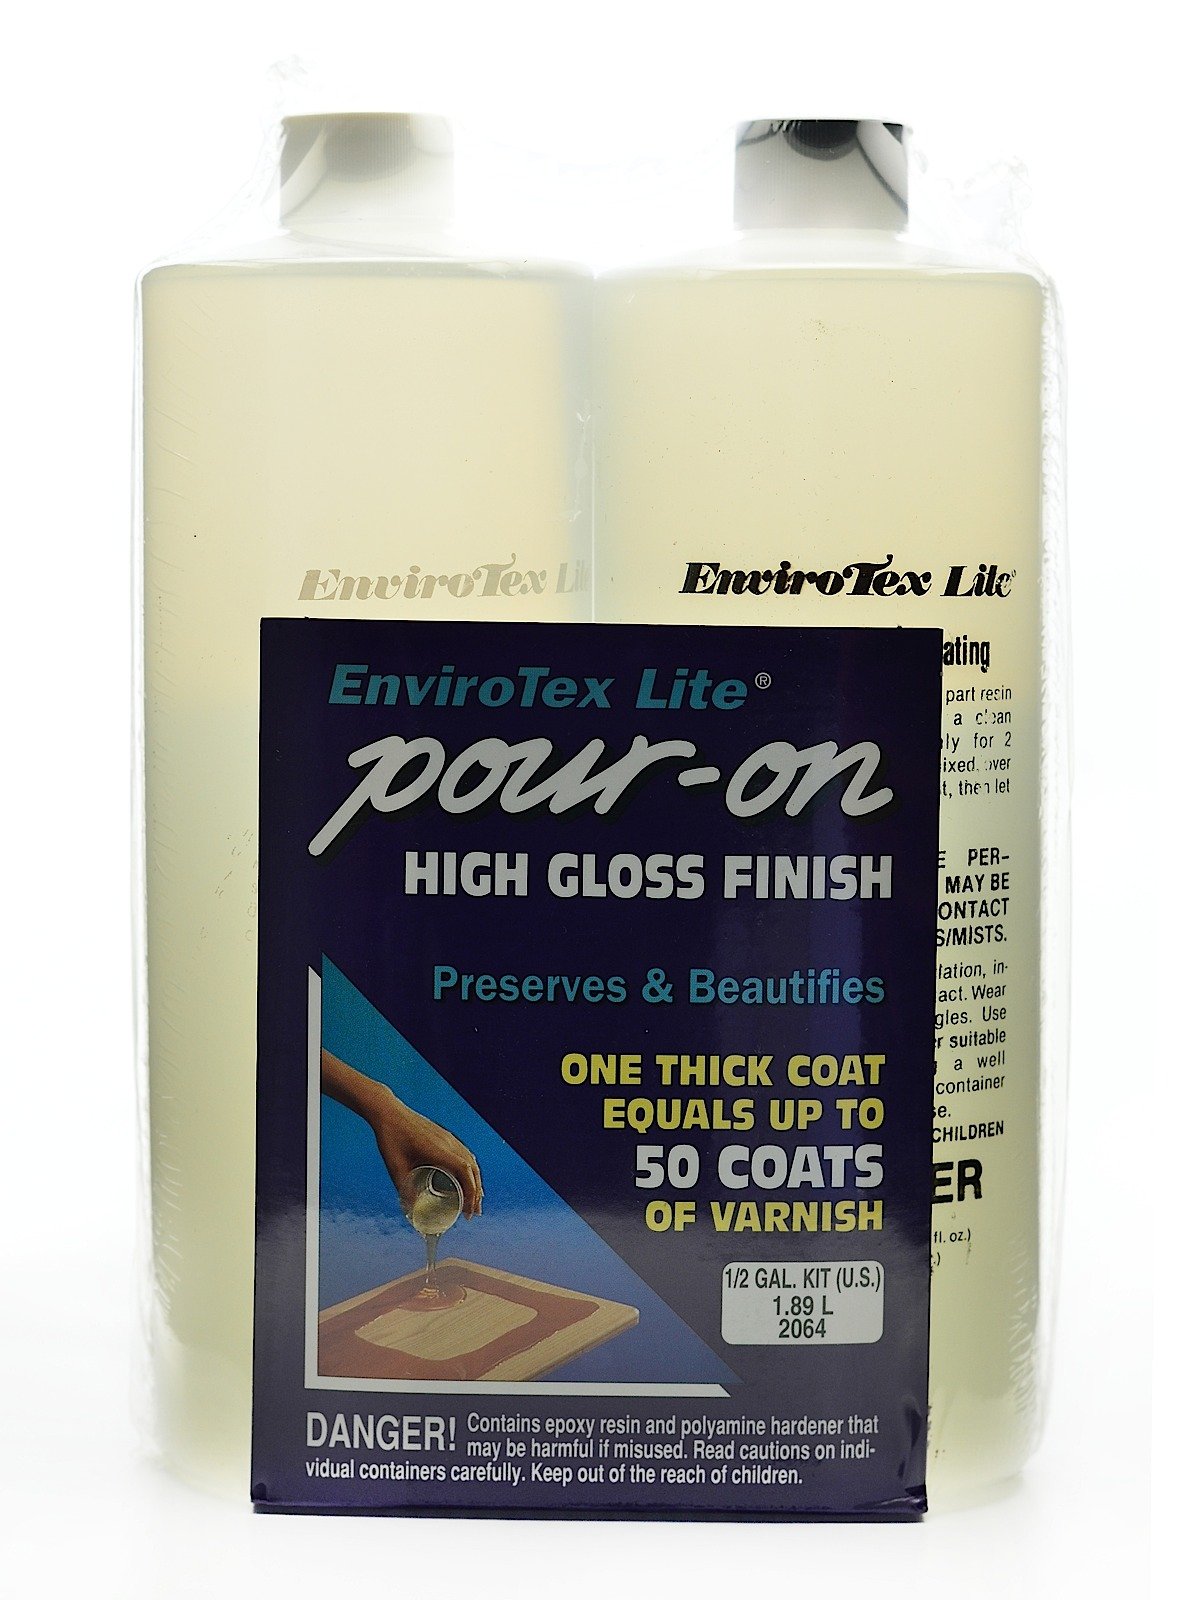 Envirotex Lite Pour-On High Gloss Finish